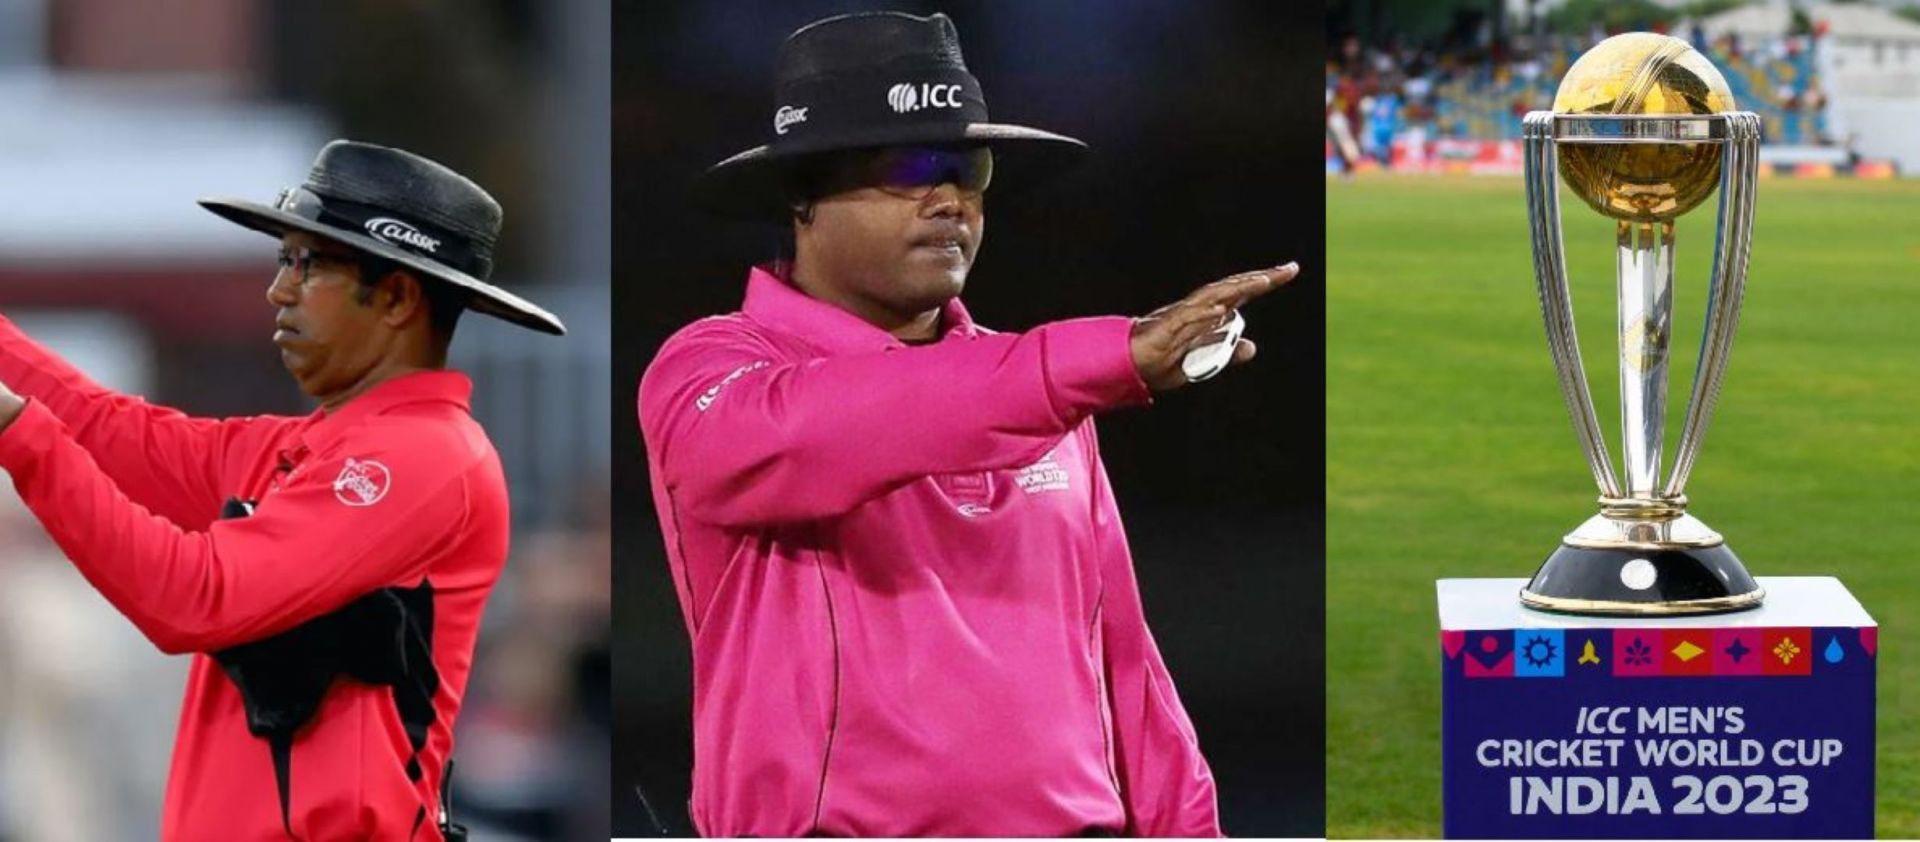 The umpires will face several challenges amidst the noisy crowds in India